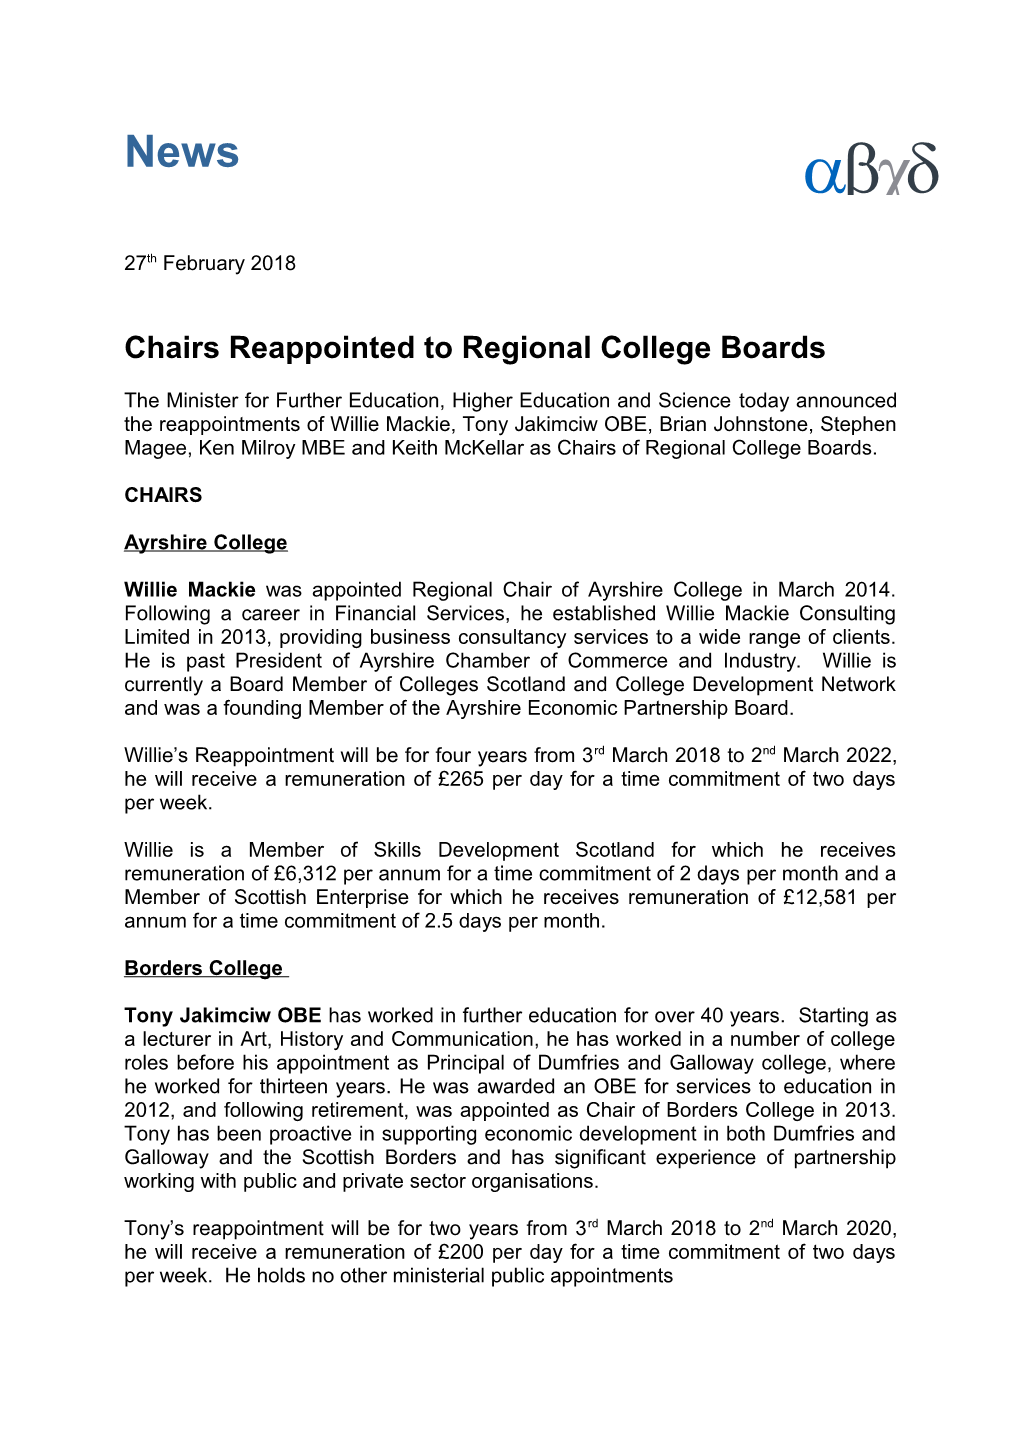 Chairs Reappointed to Regional College Boards